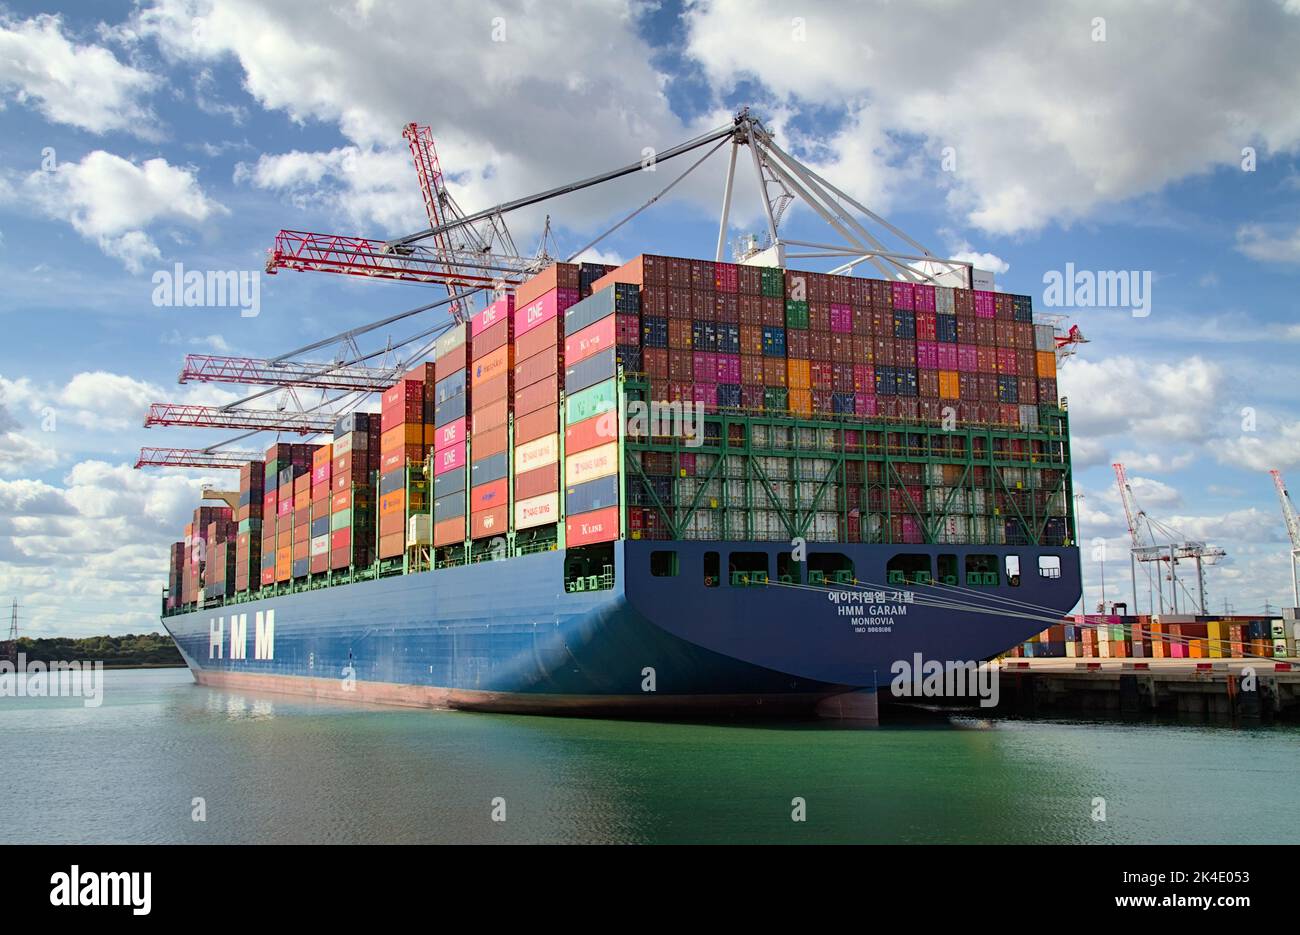 HMM Garam Container Cargo Ship Being Loaded At The Dockside In Southampton Docks UK Stock Photo